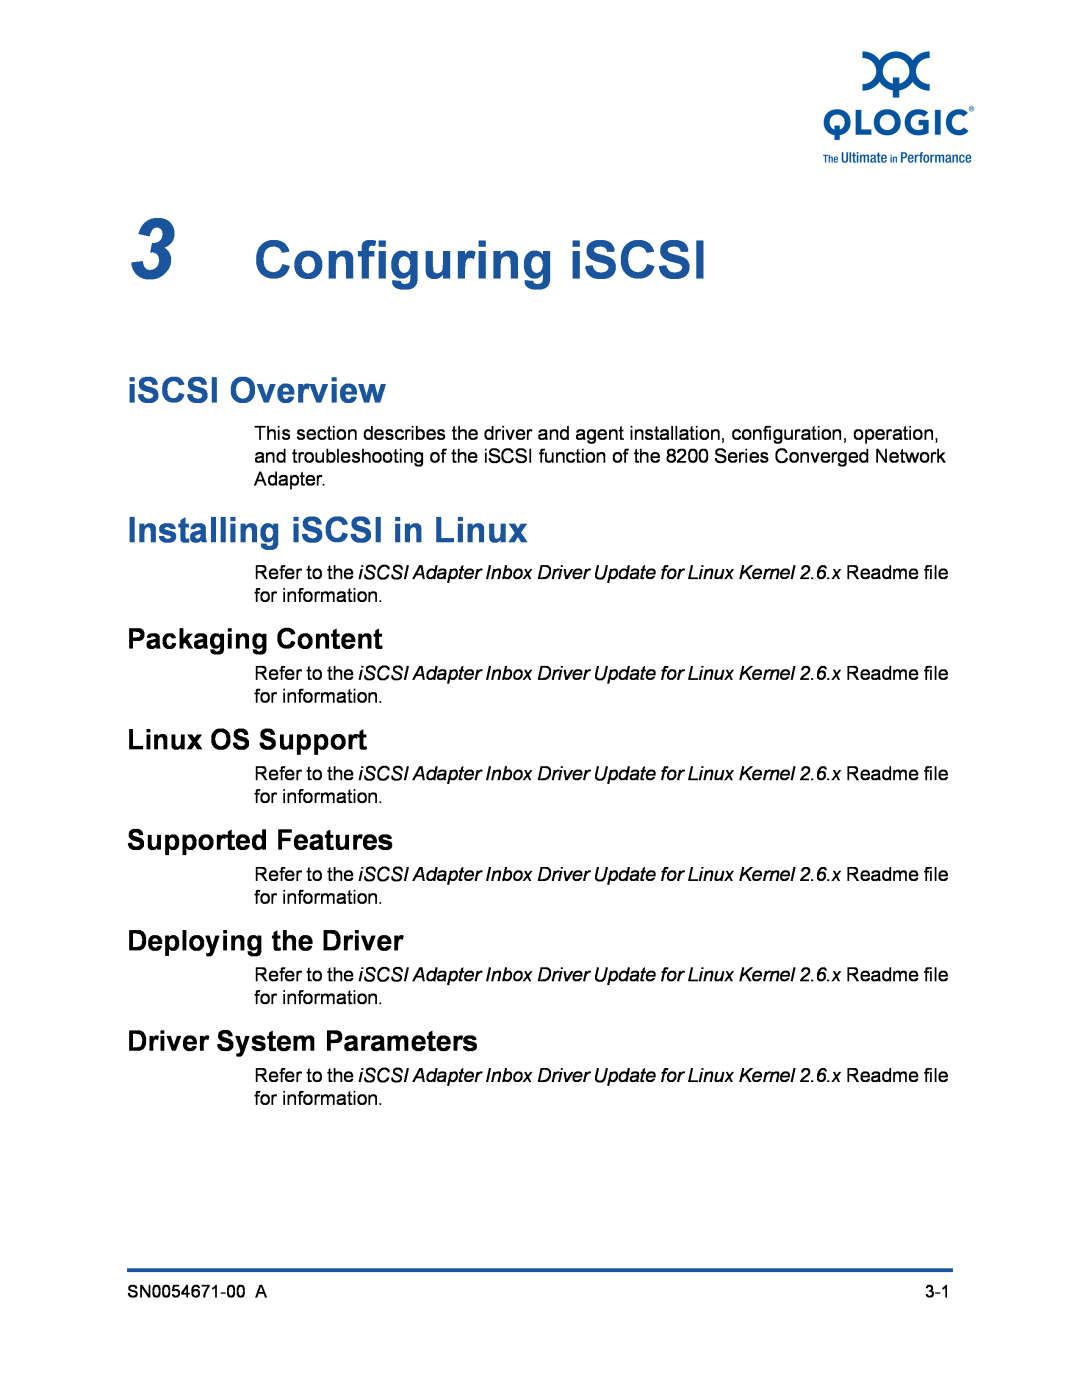 Q-Logic 3200 Configuring iSCSI, iSCSI Overview, Installing iSCSI in Linux, Deploying the Driver, Driver System Parameters 